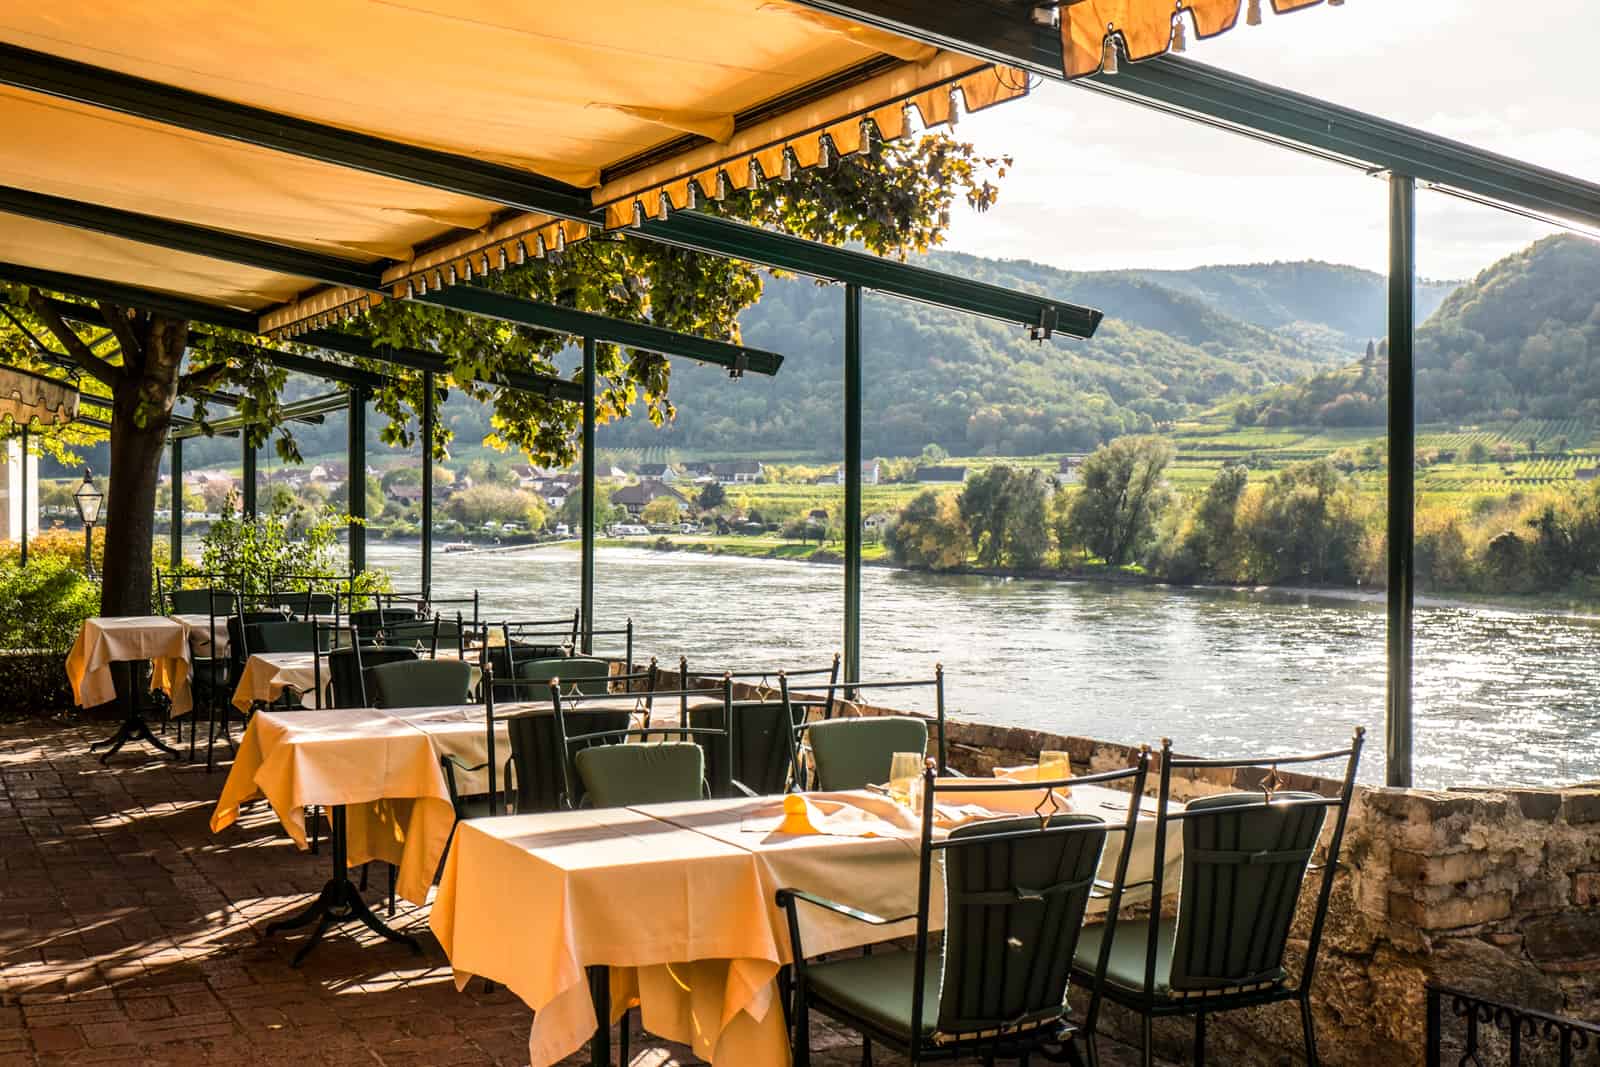 The green chairs and white tables in the Schlossberg Hotel Durnstein overlooking the Danube River and the surrounding green